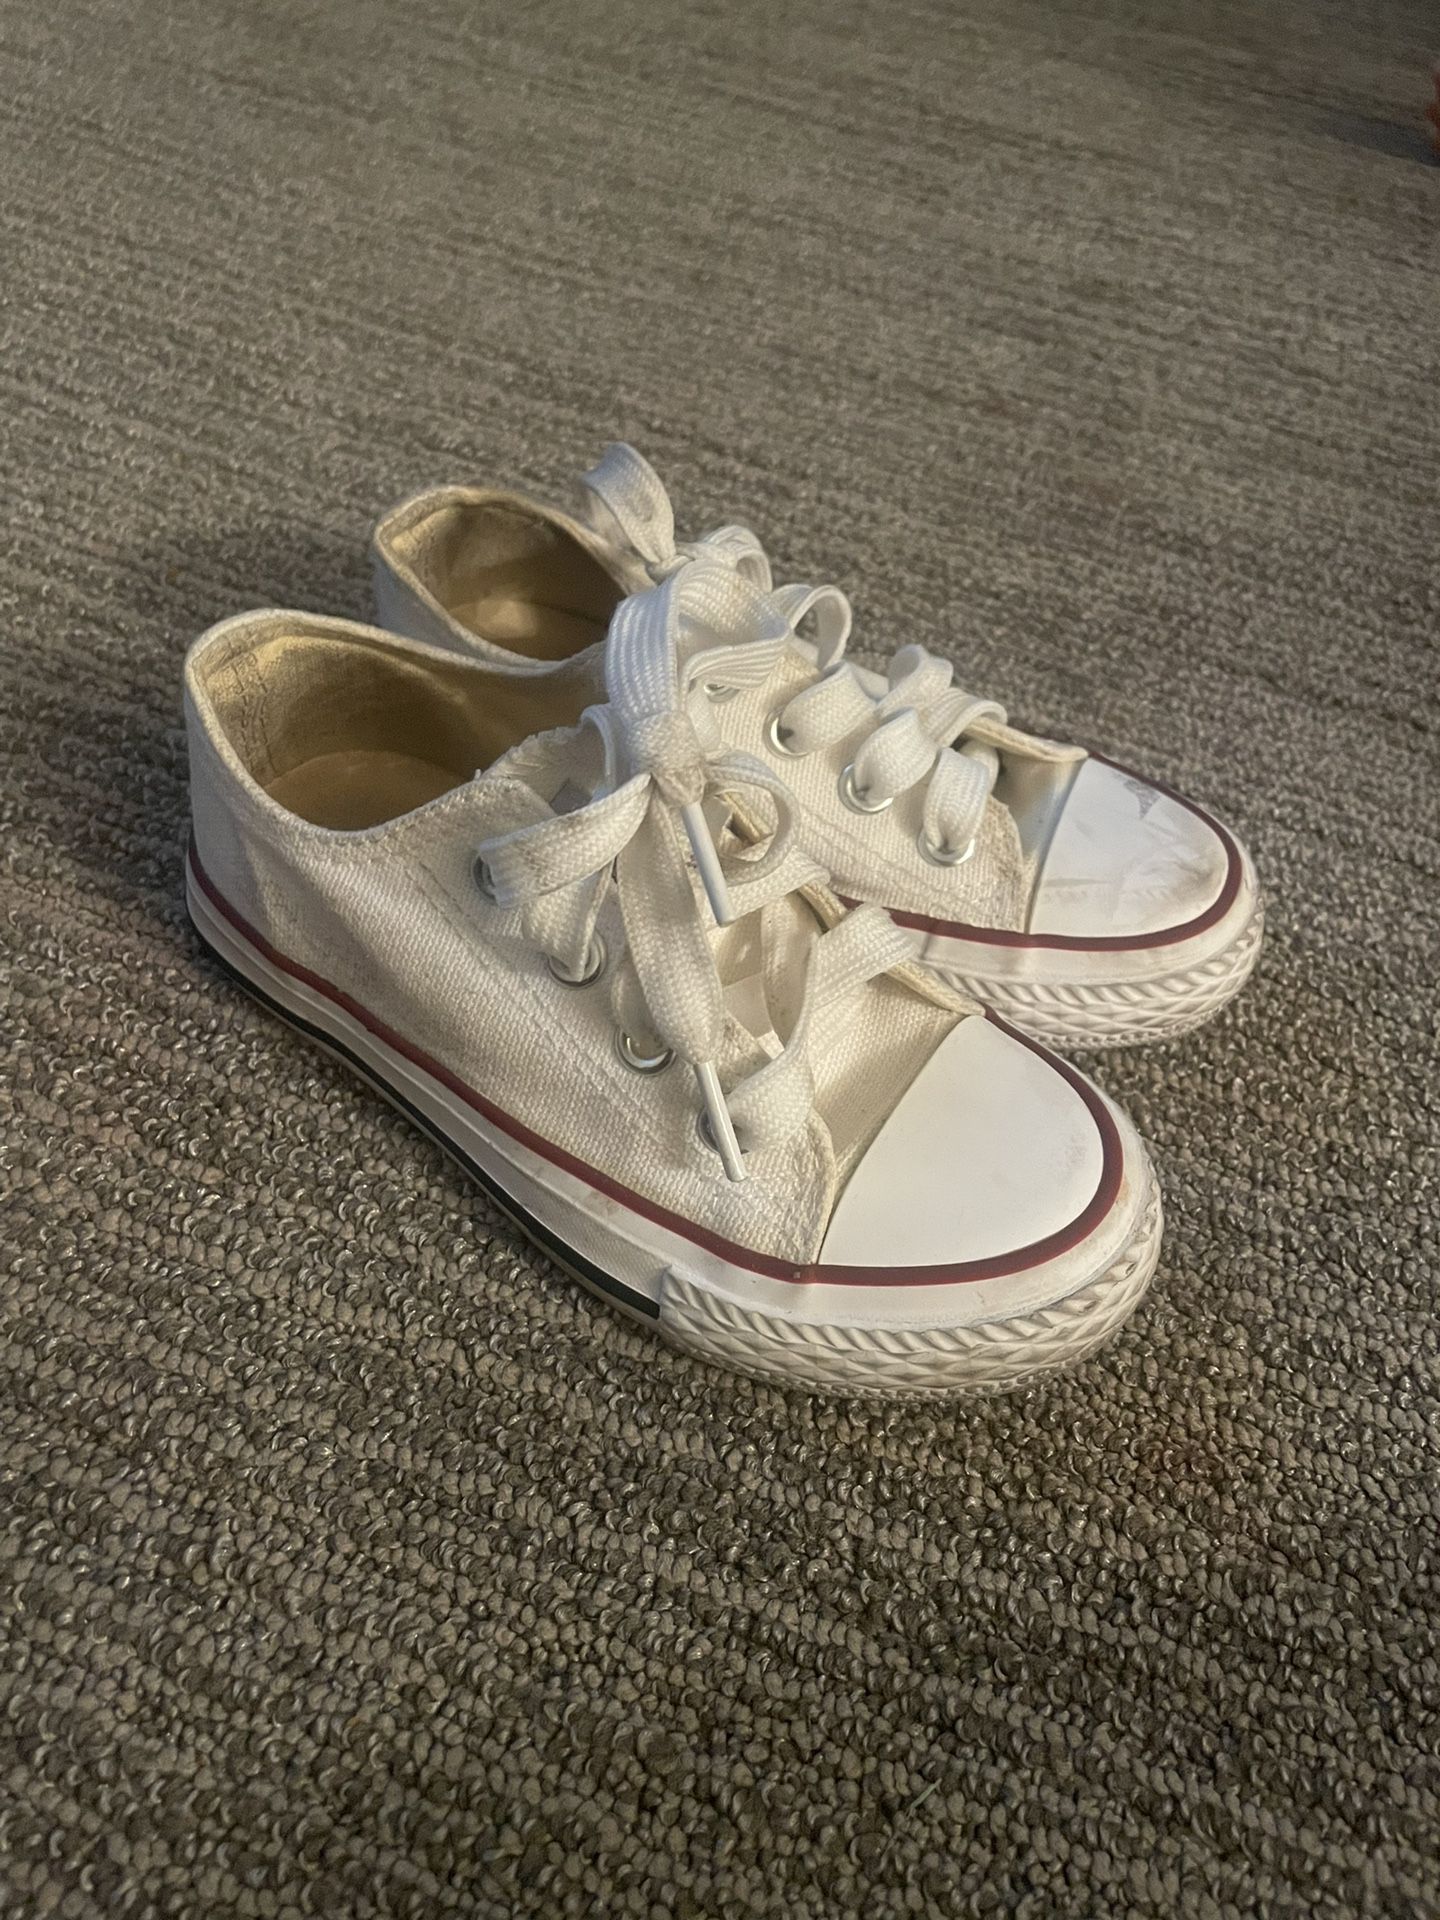 Toddler Shoes Size 10 1/2 C